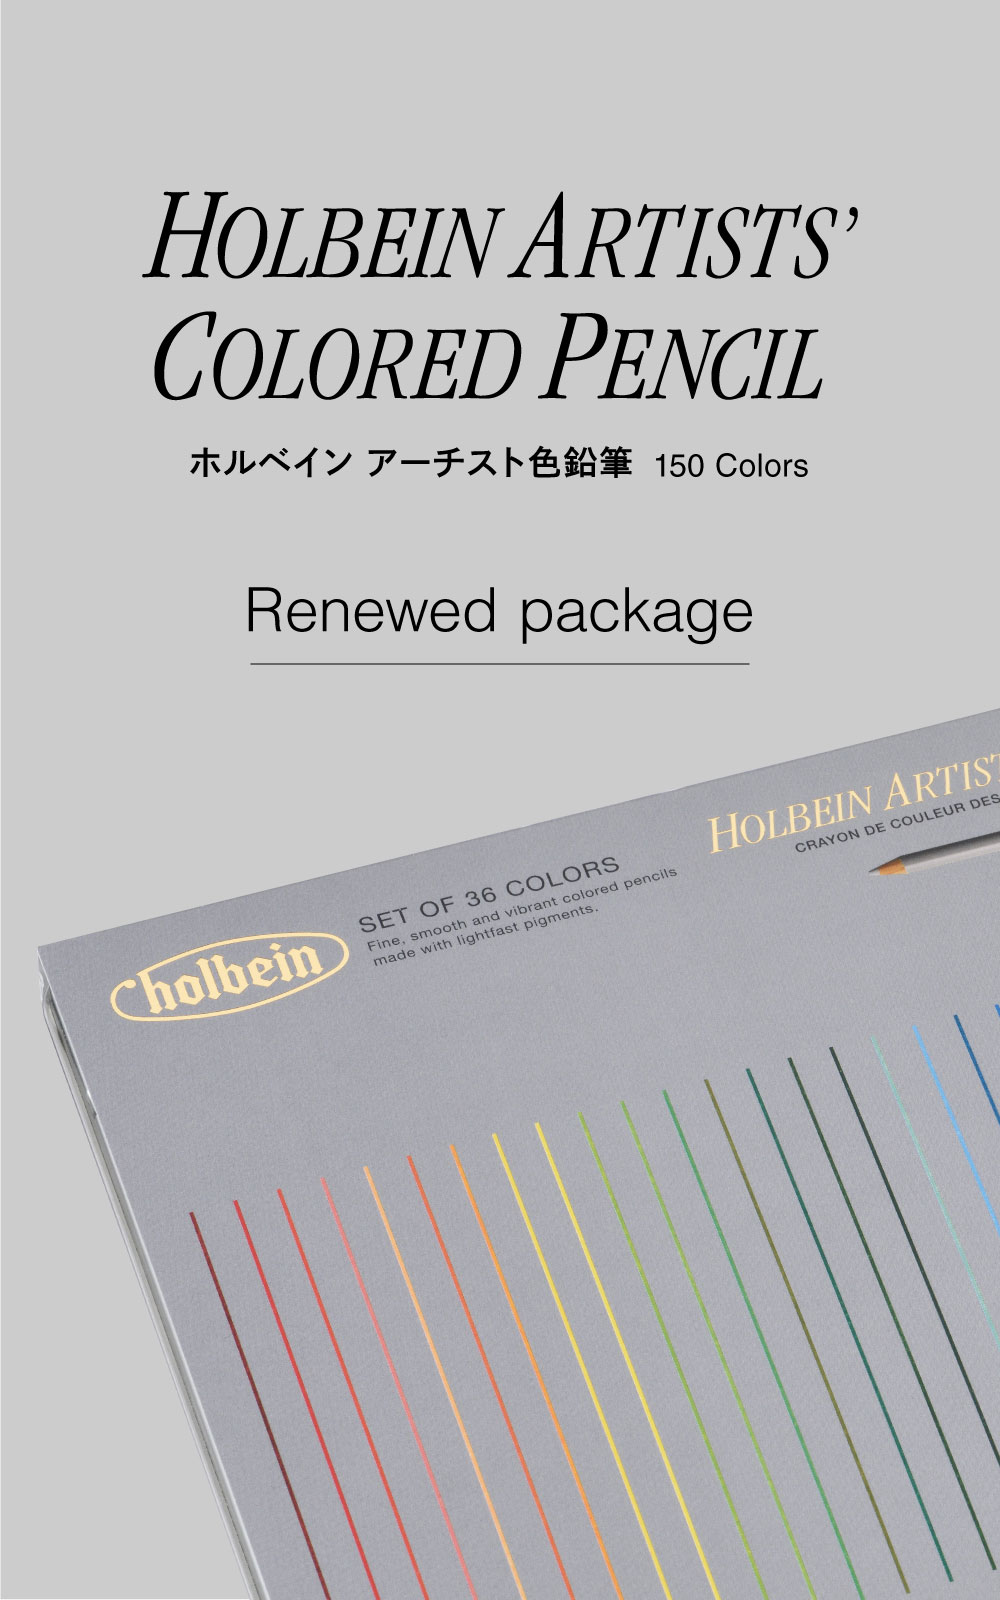 HOLBEIN ARTISTS' COLORED PENCIL 150 Colors Renewed package